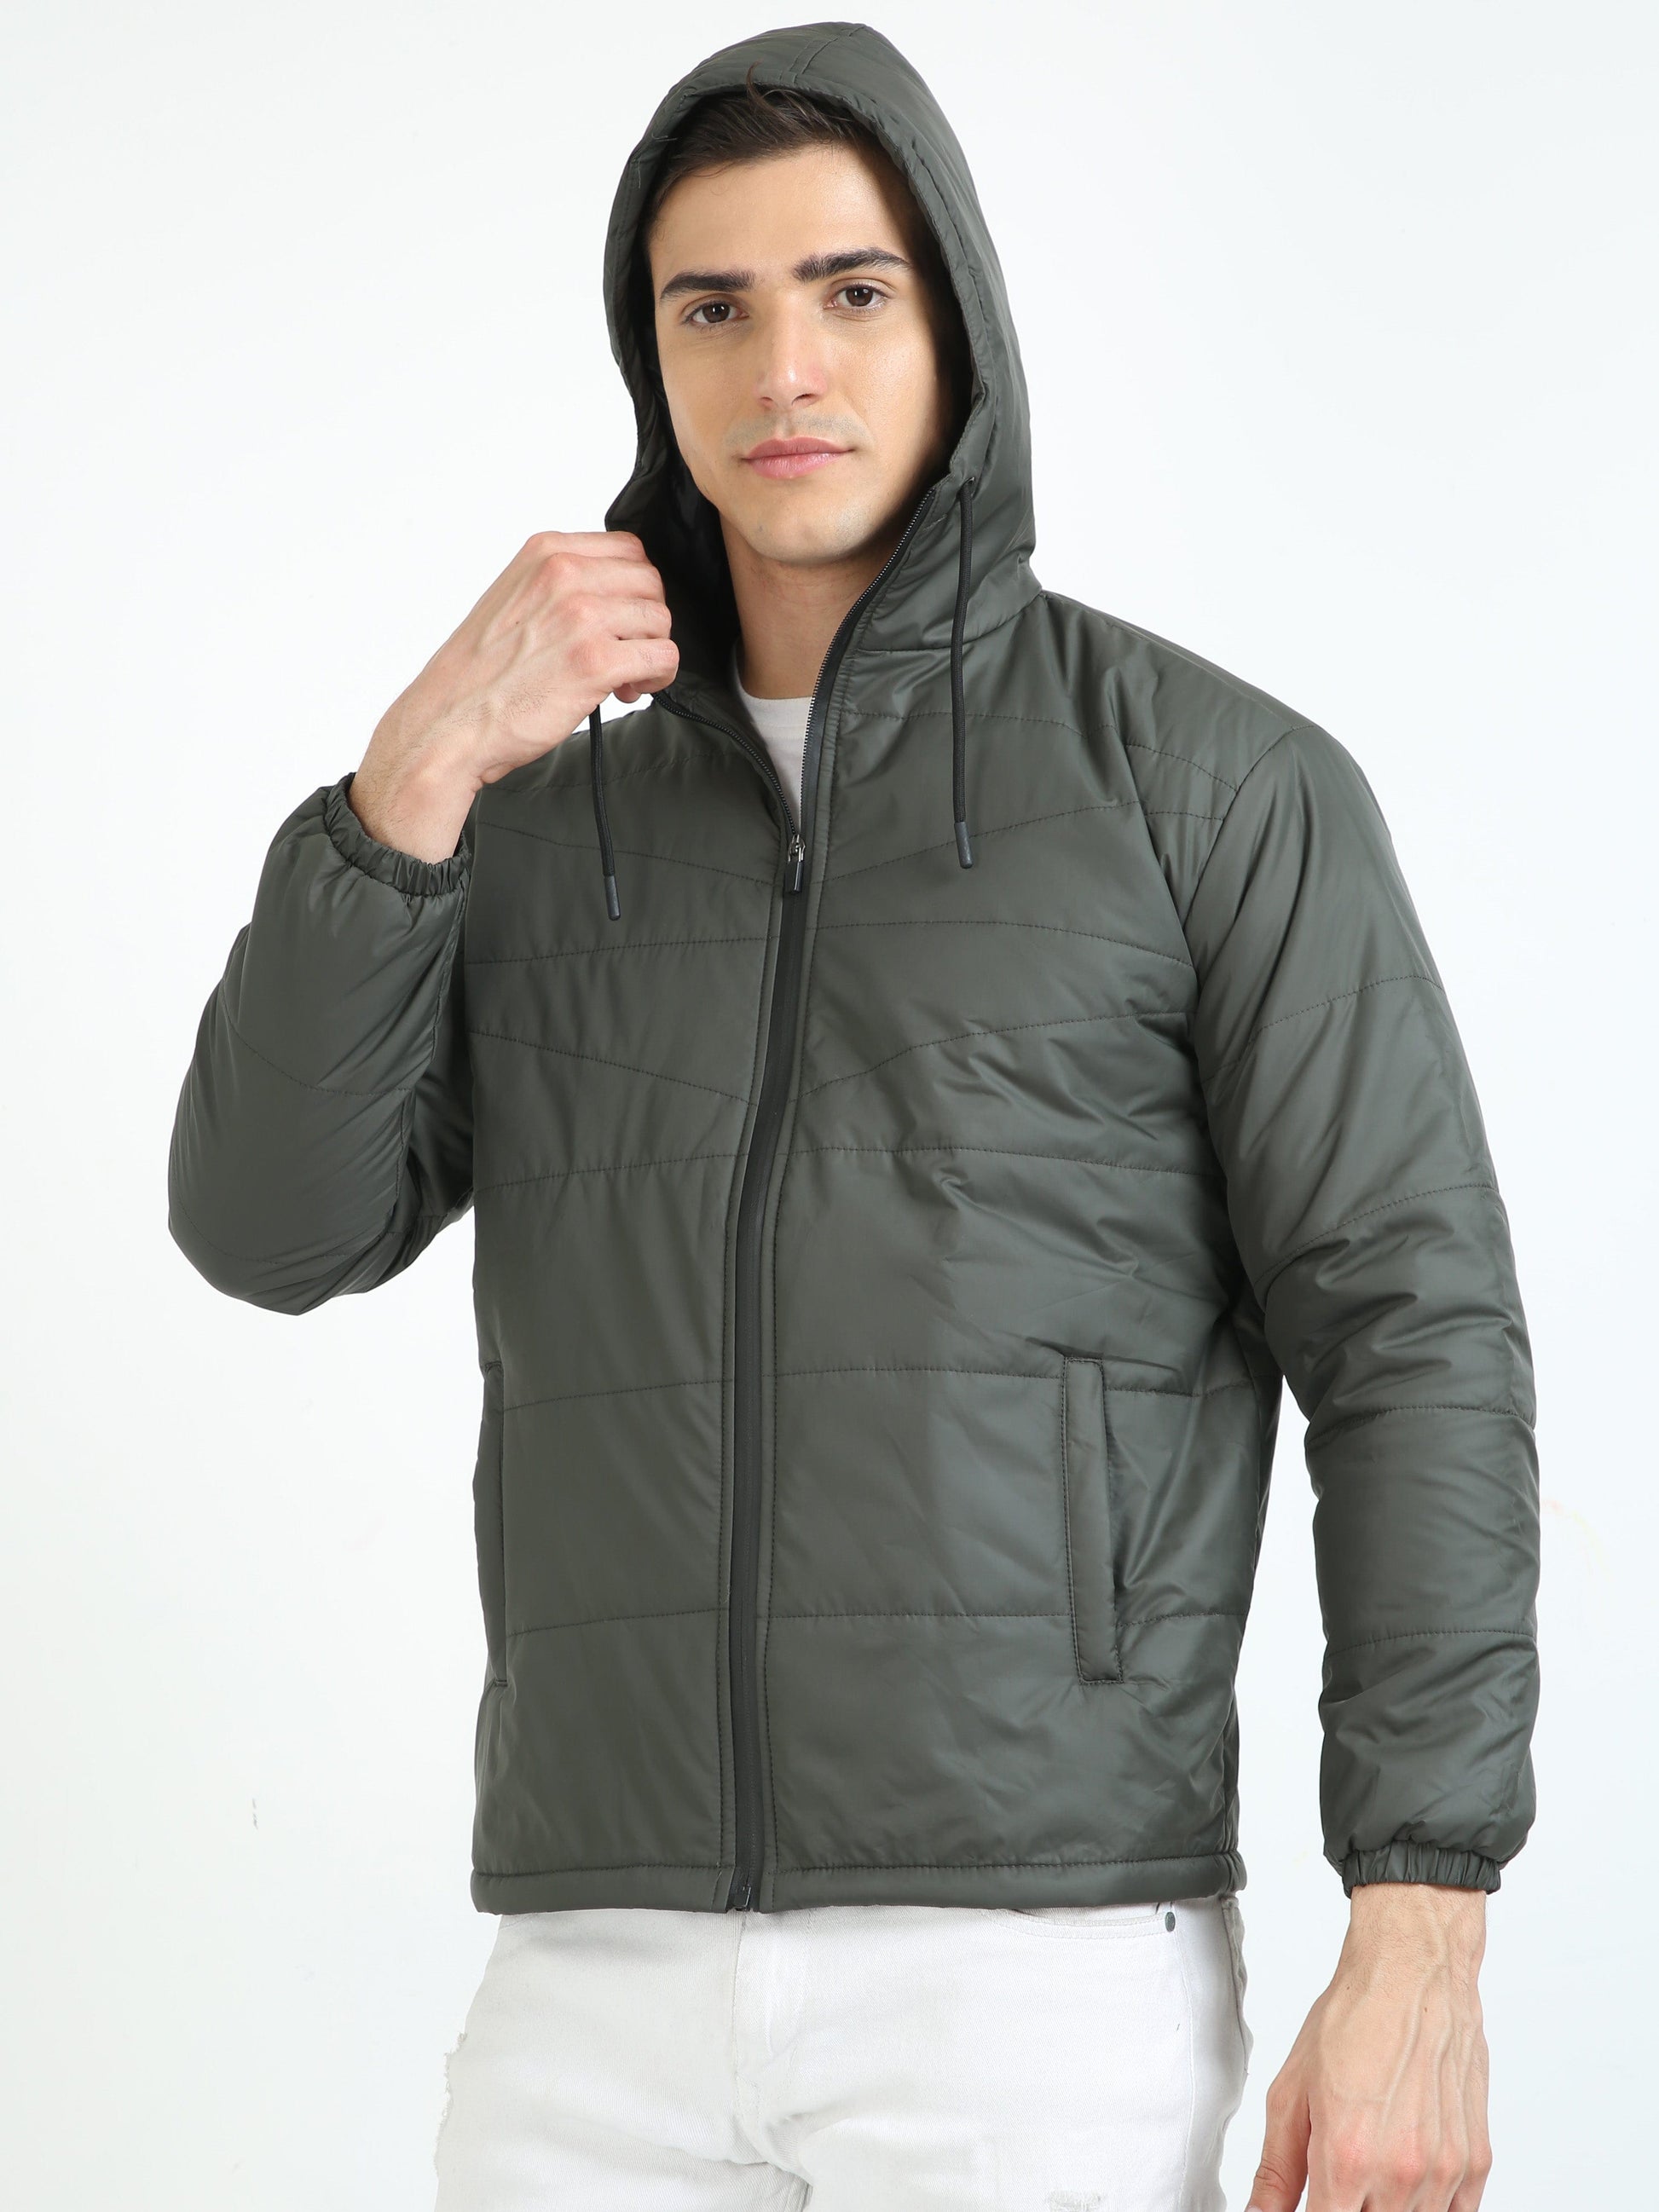 Olive Green Bomber With Hood Jacket